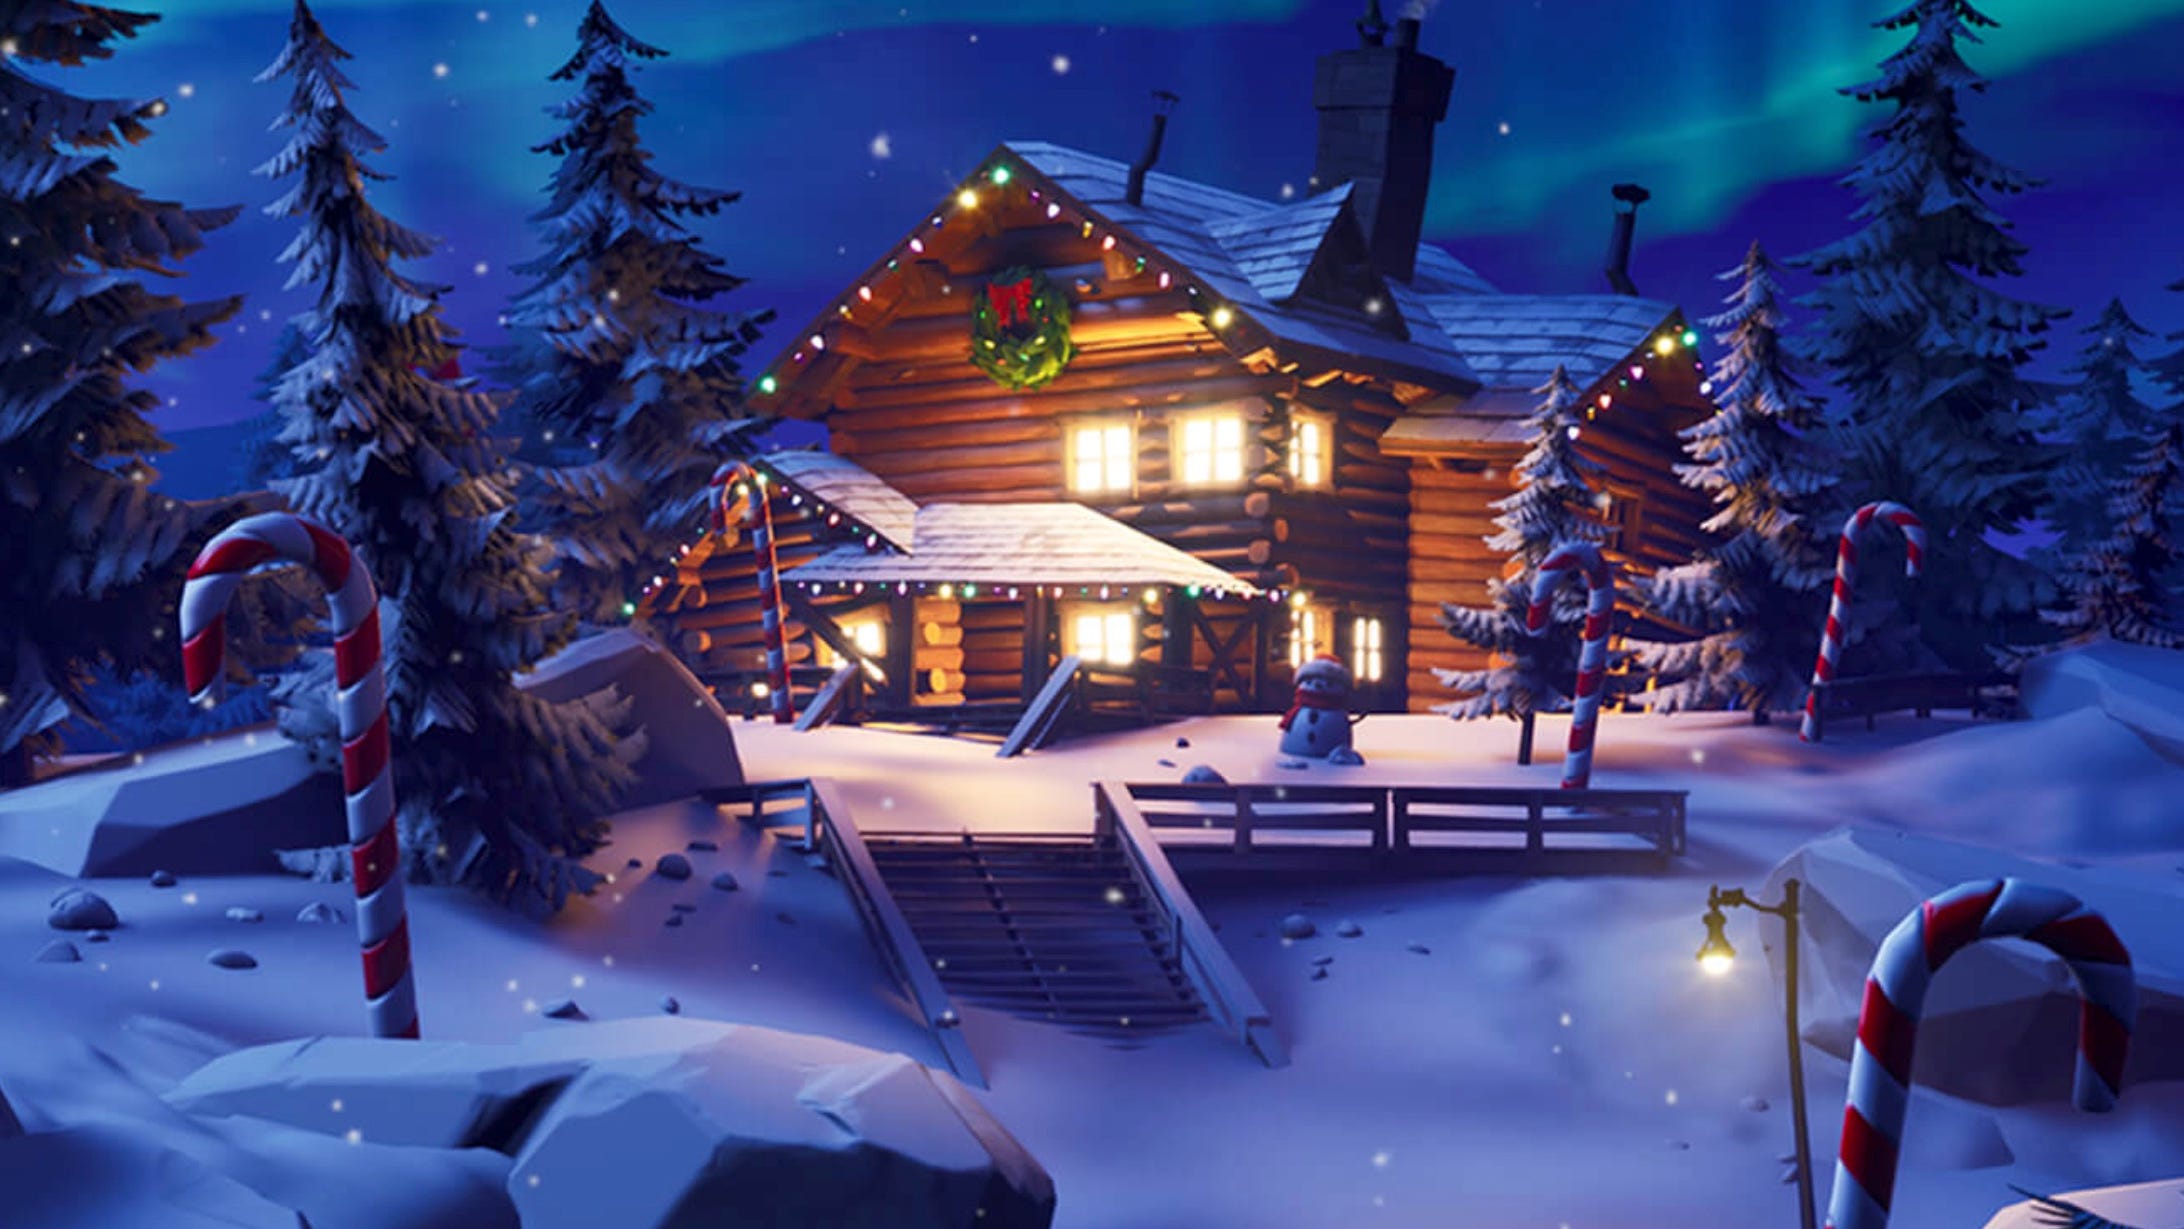 'Fortnite' gets Christmas trees for its Winterfest holiday event